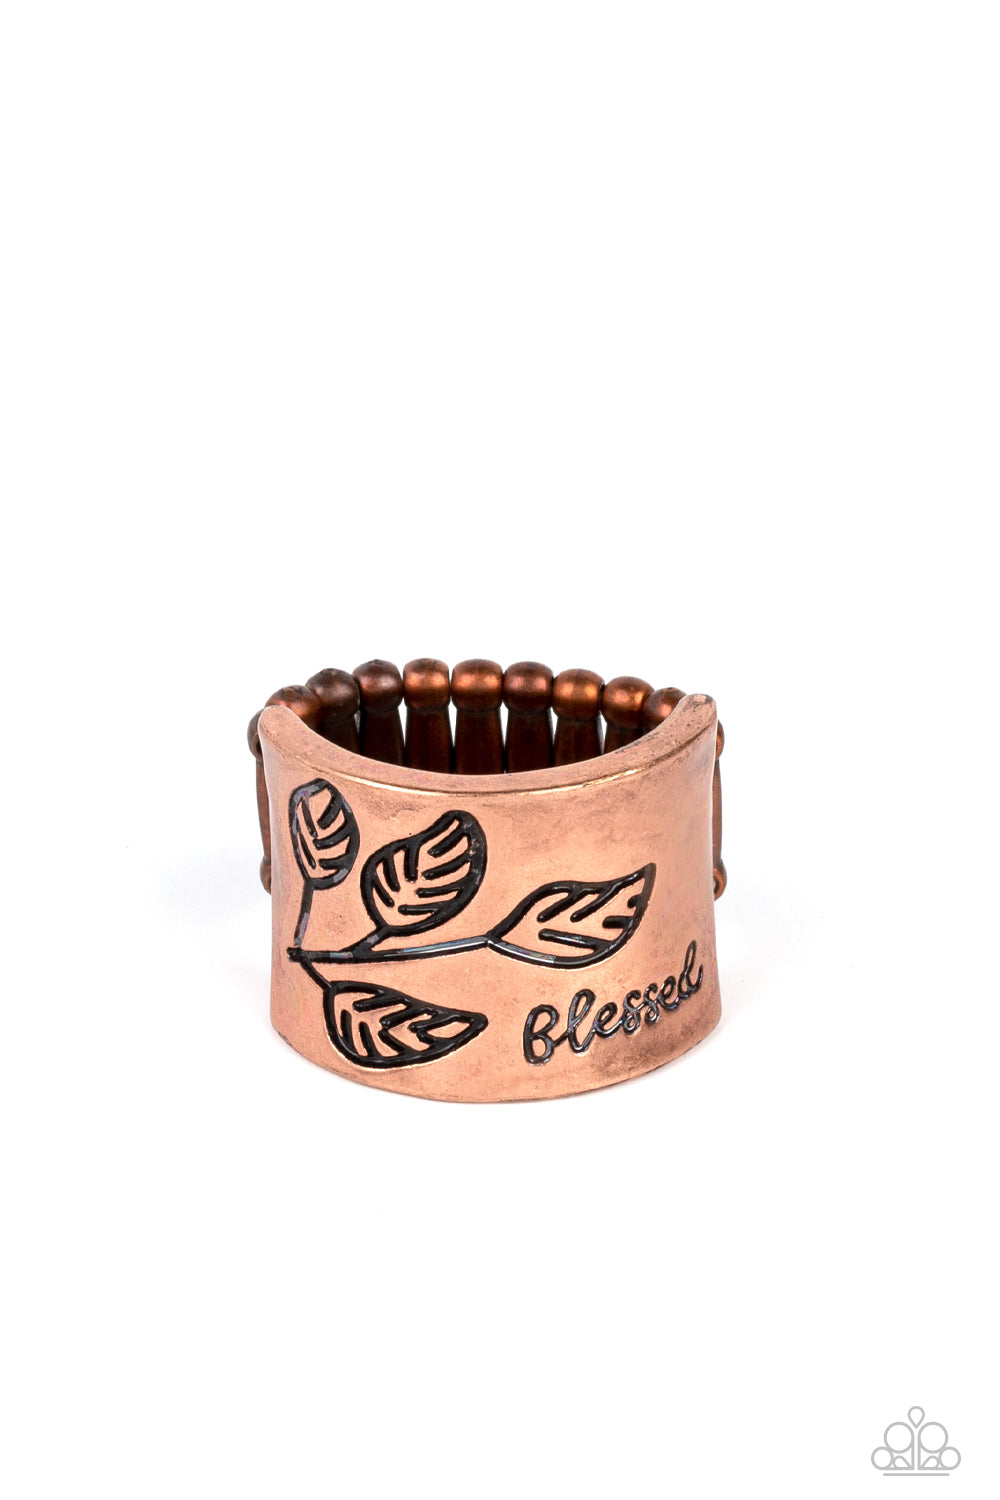 Blessed with Bling - Copper Ring - Princess Glam Shop